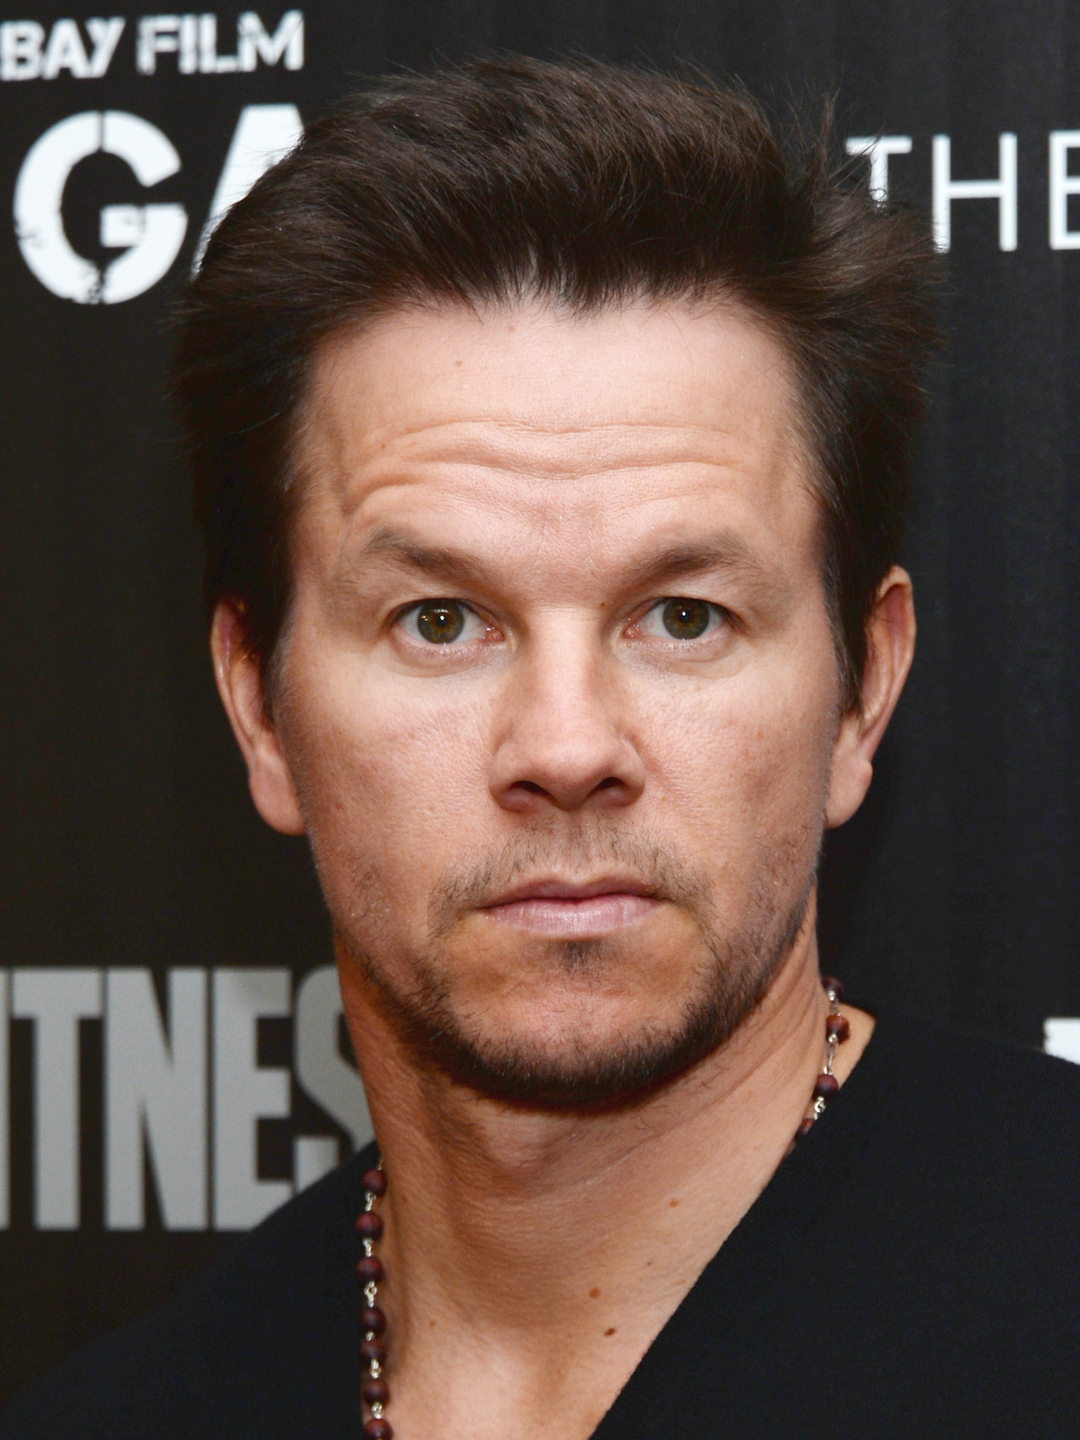 Mark Wahlberg young photos